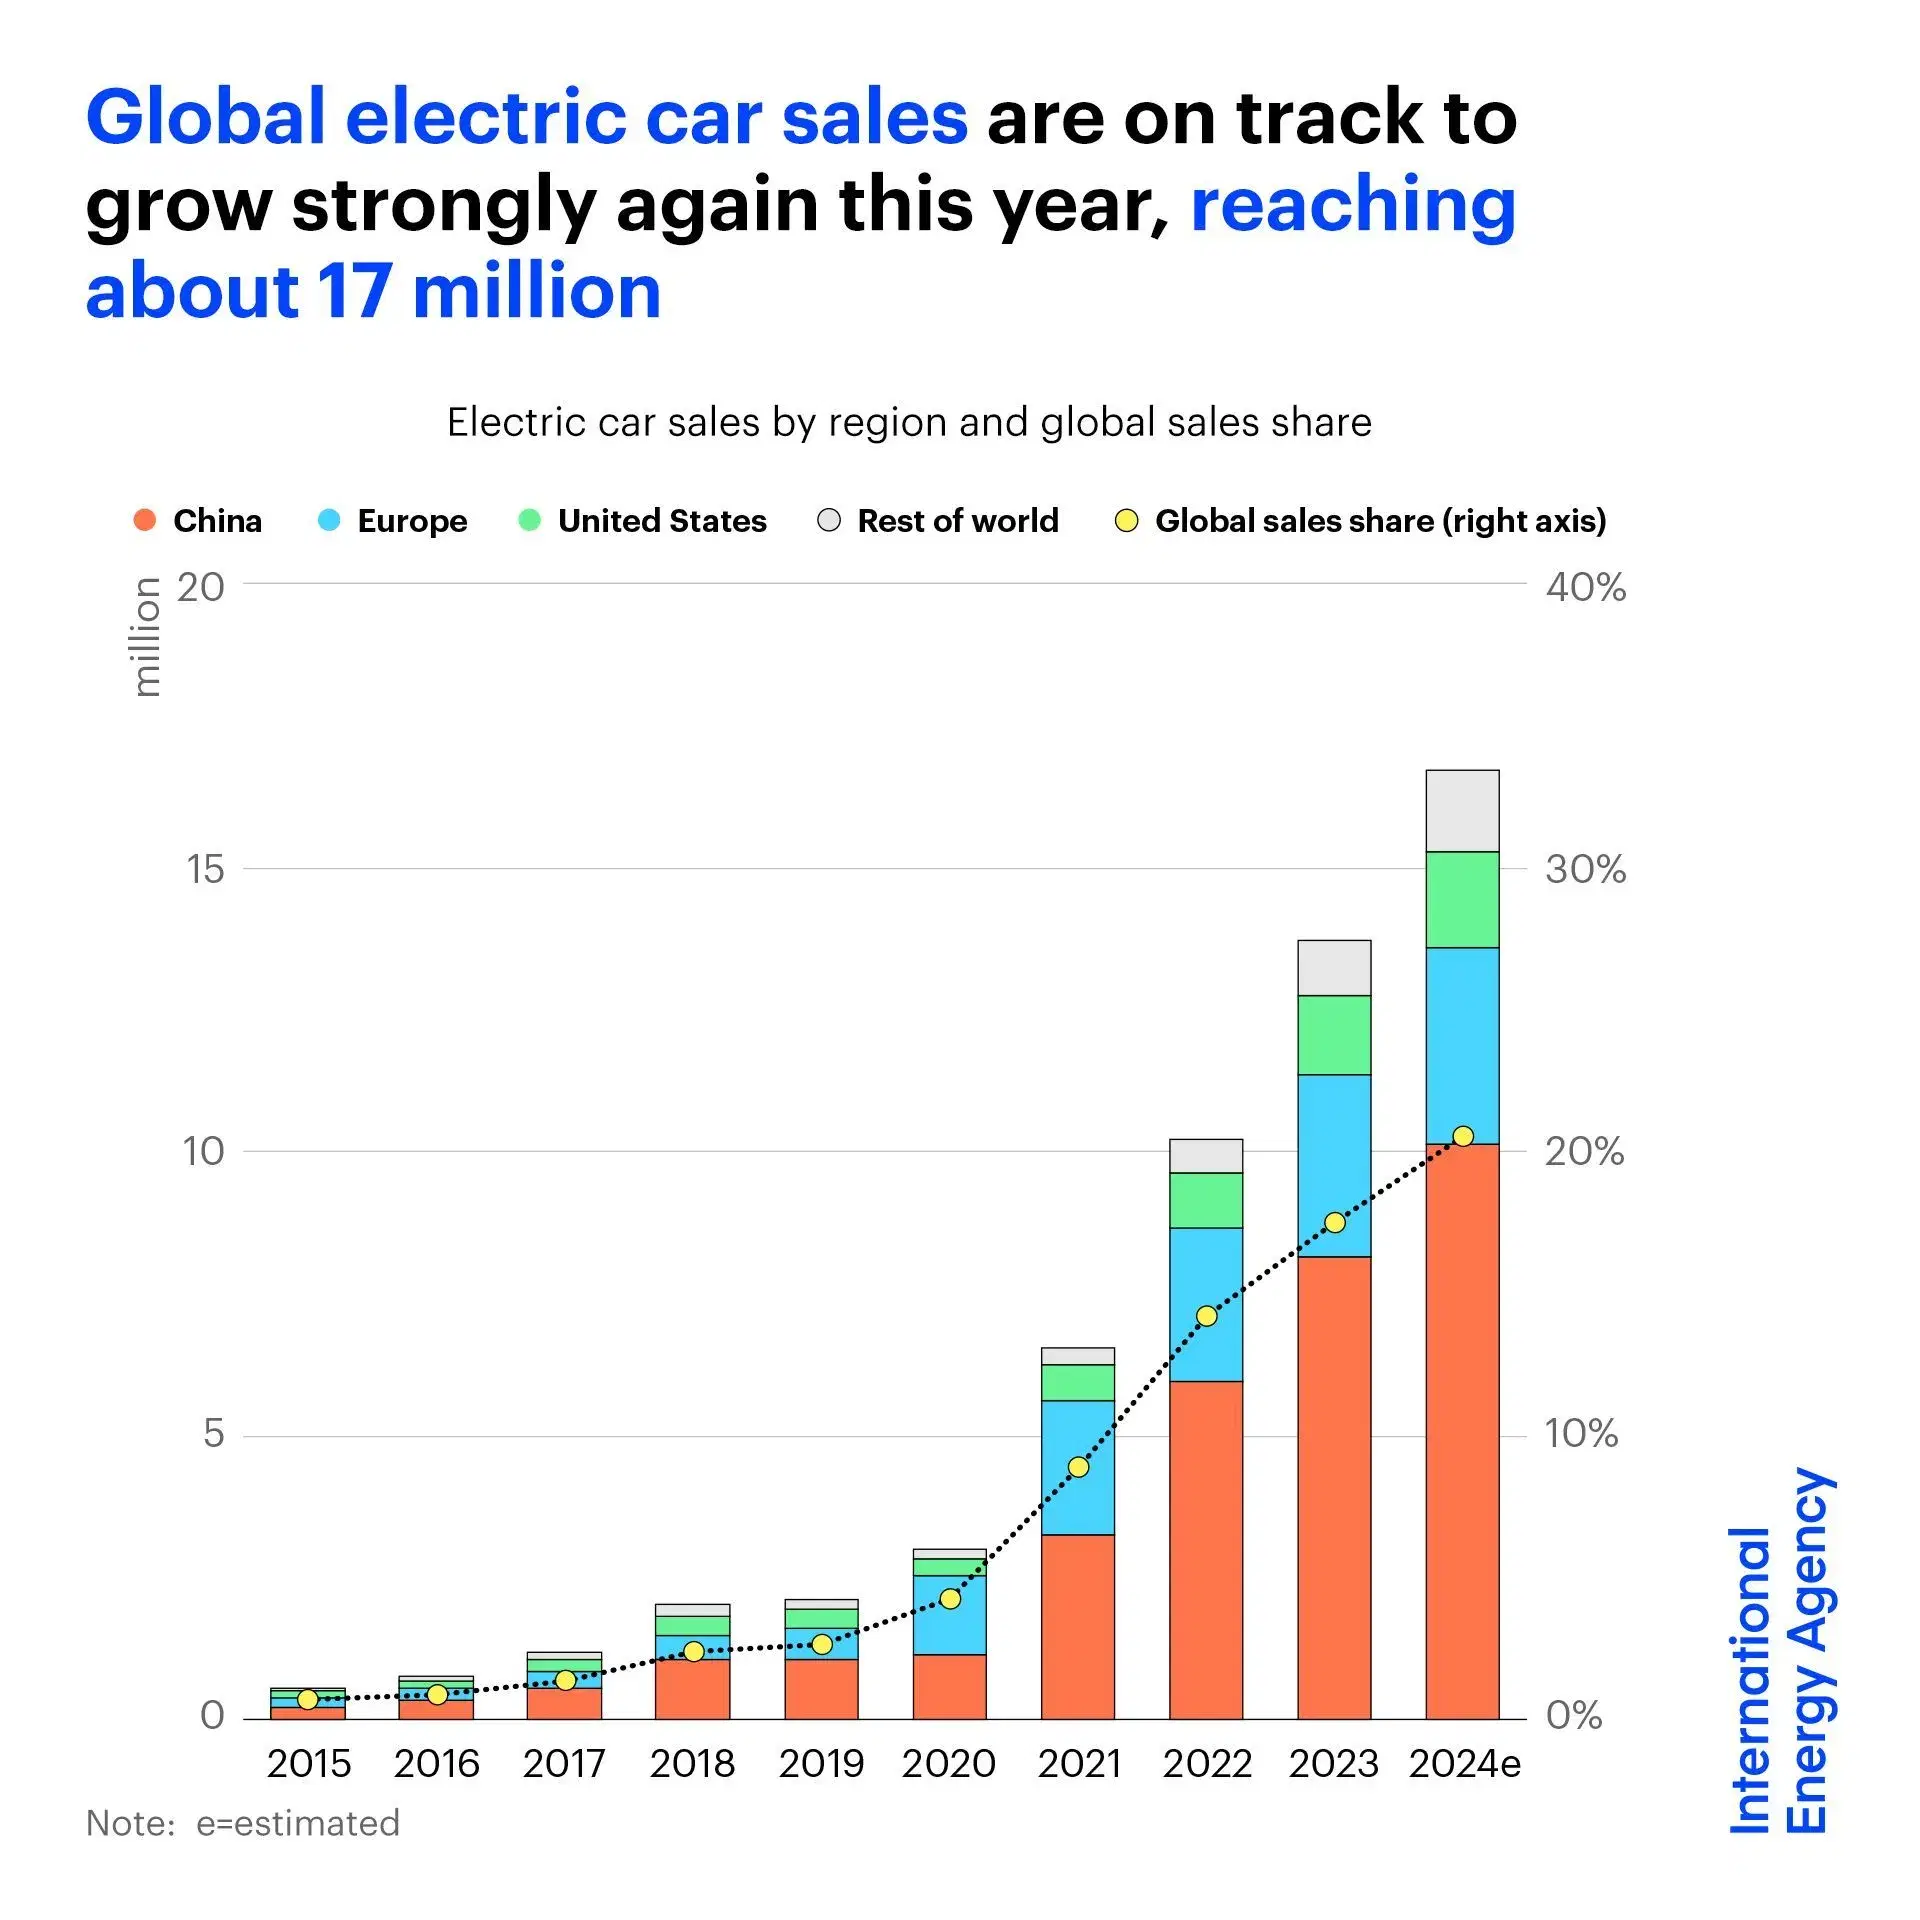 Electric Car Sales Set to Grow Strongly, Reaching 17 Million This Year